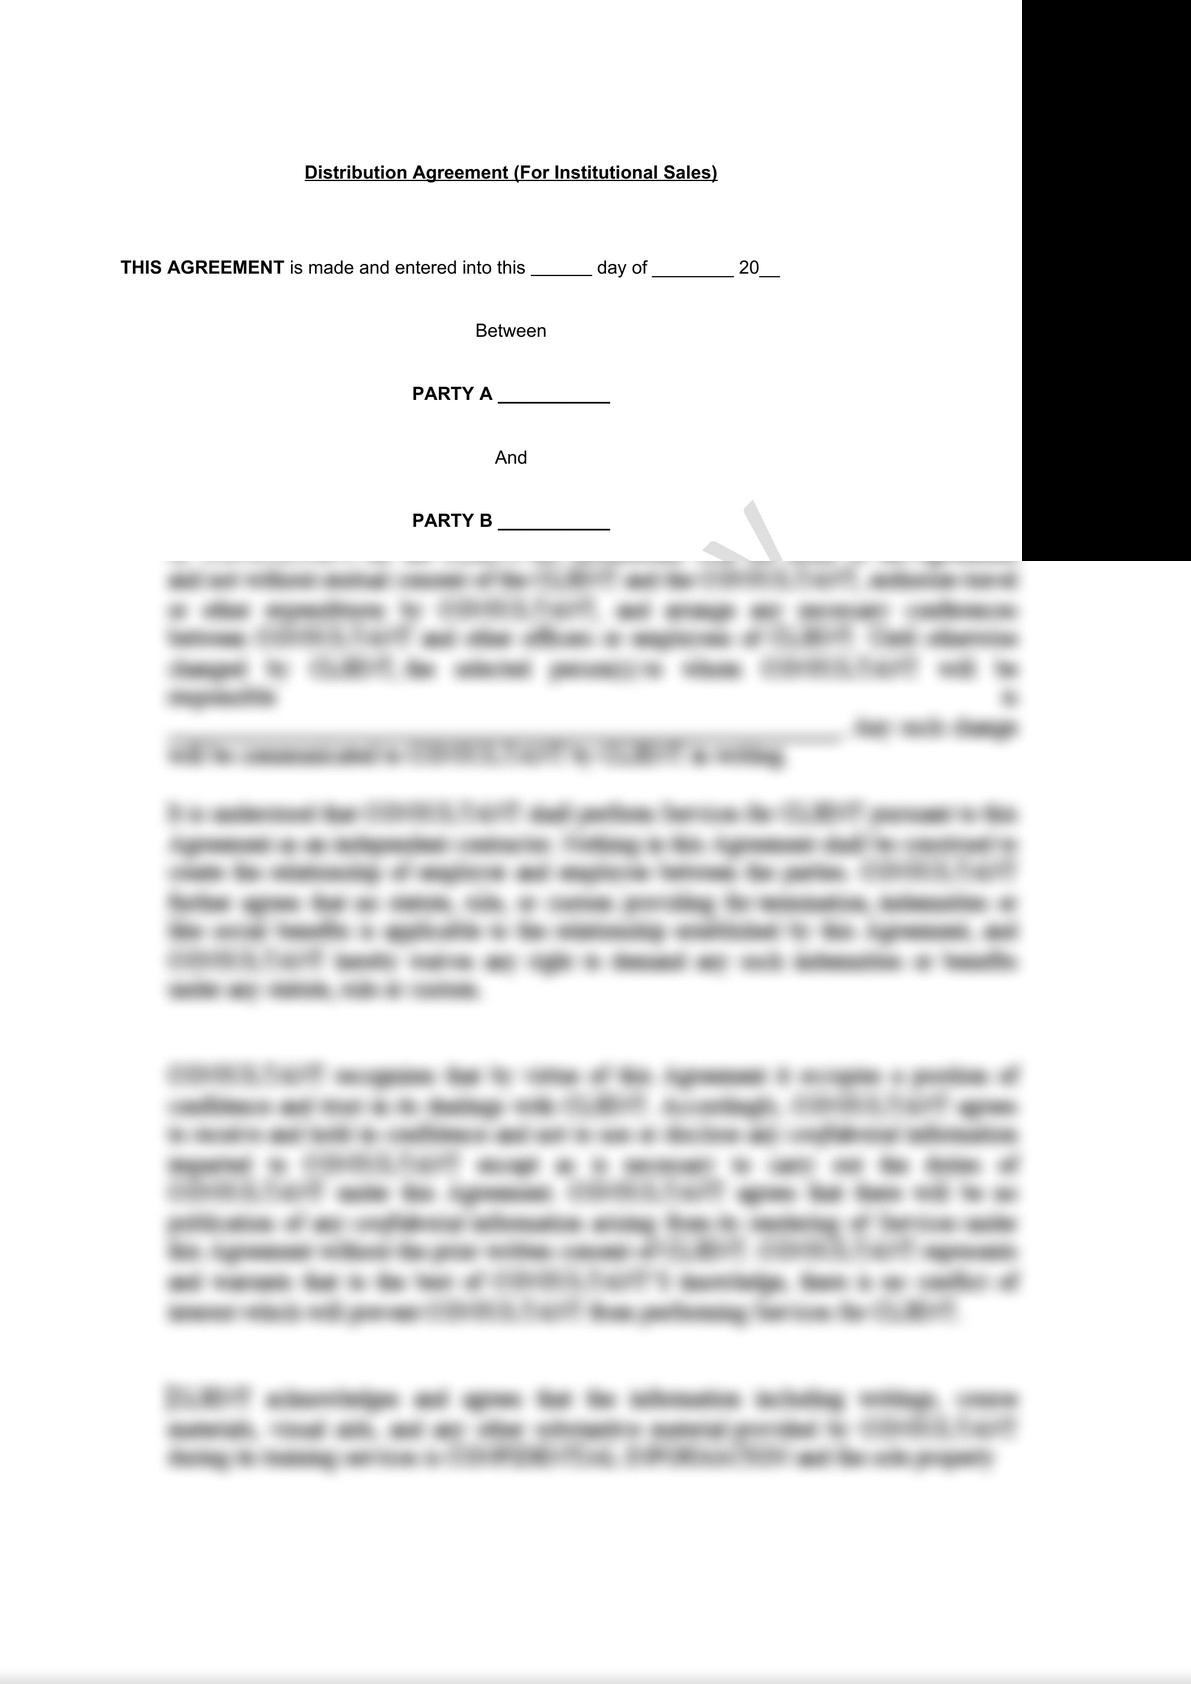 Distribution Agreement Draft (for institutional sales) -0